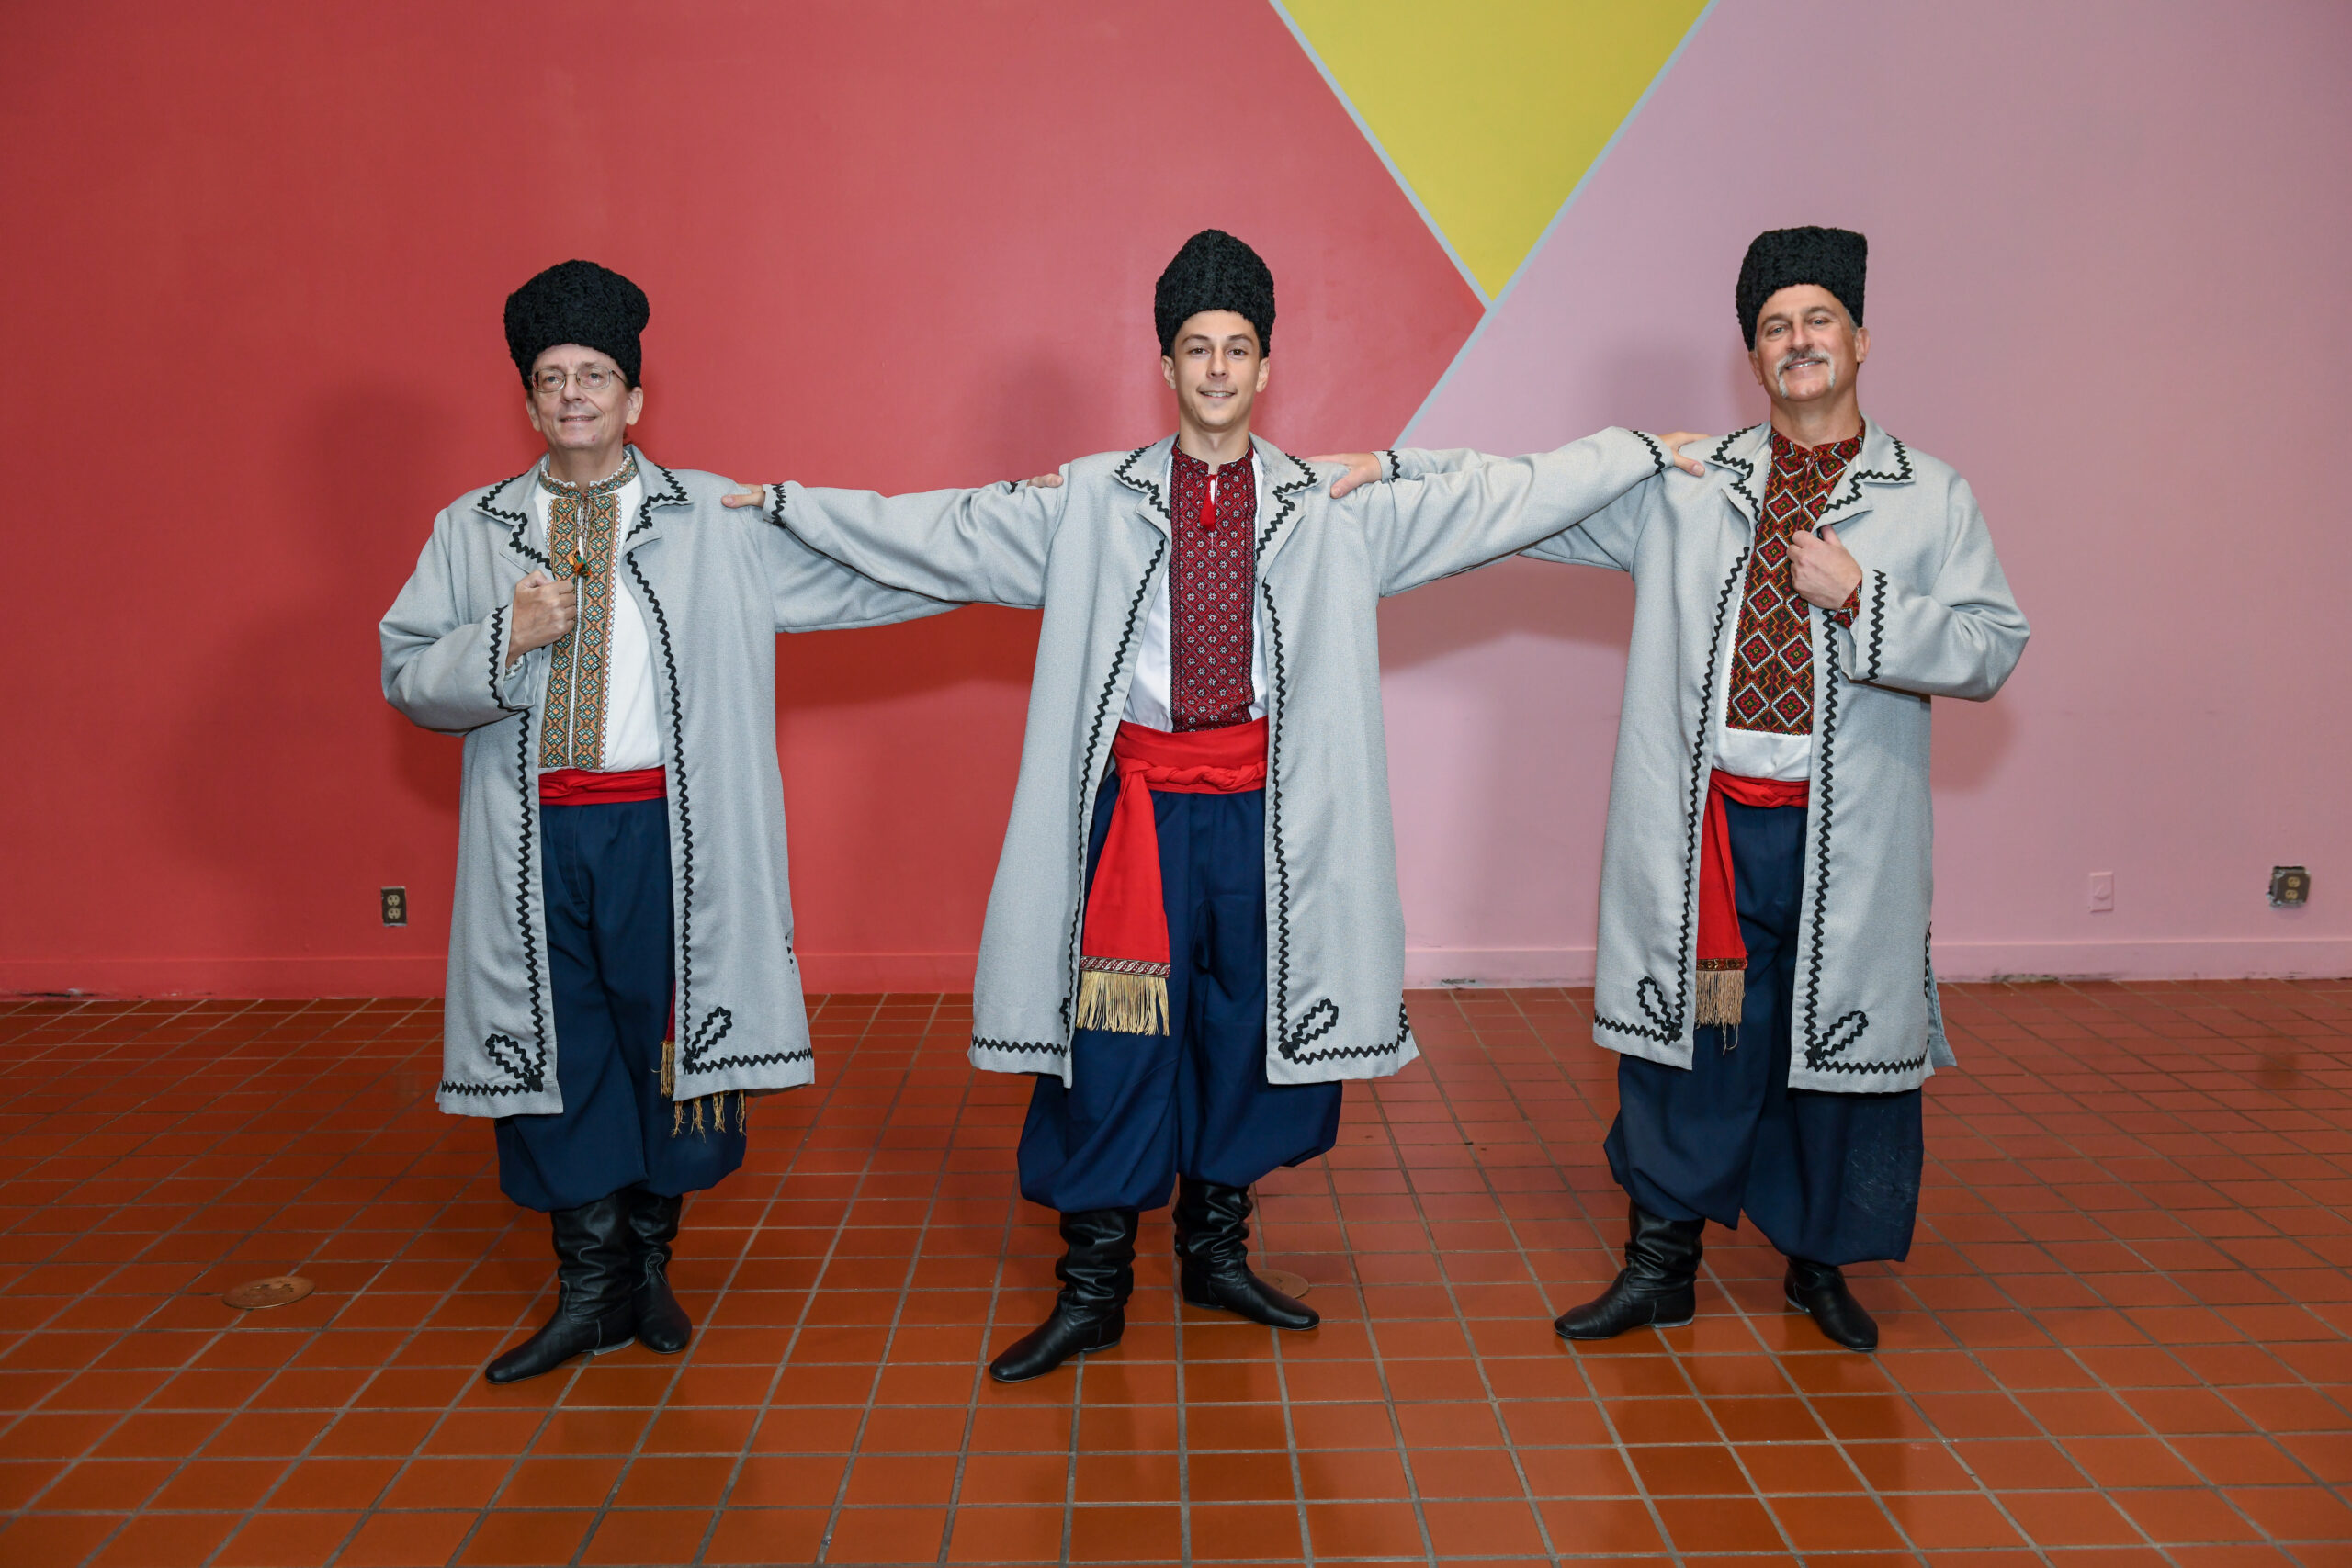 Three men pose with their arms outstretched on each others shoulders. they wear black tall hats, grey coats, embroidered shirts, and red sashes.